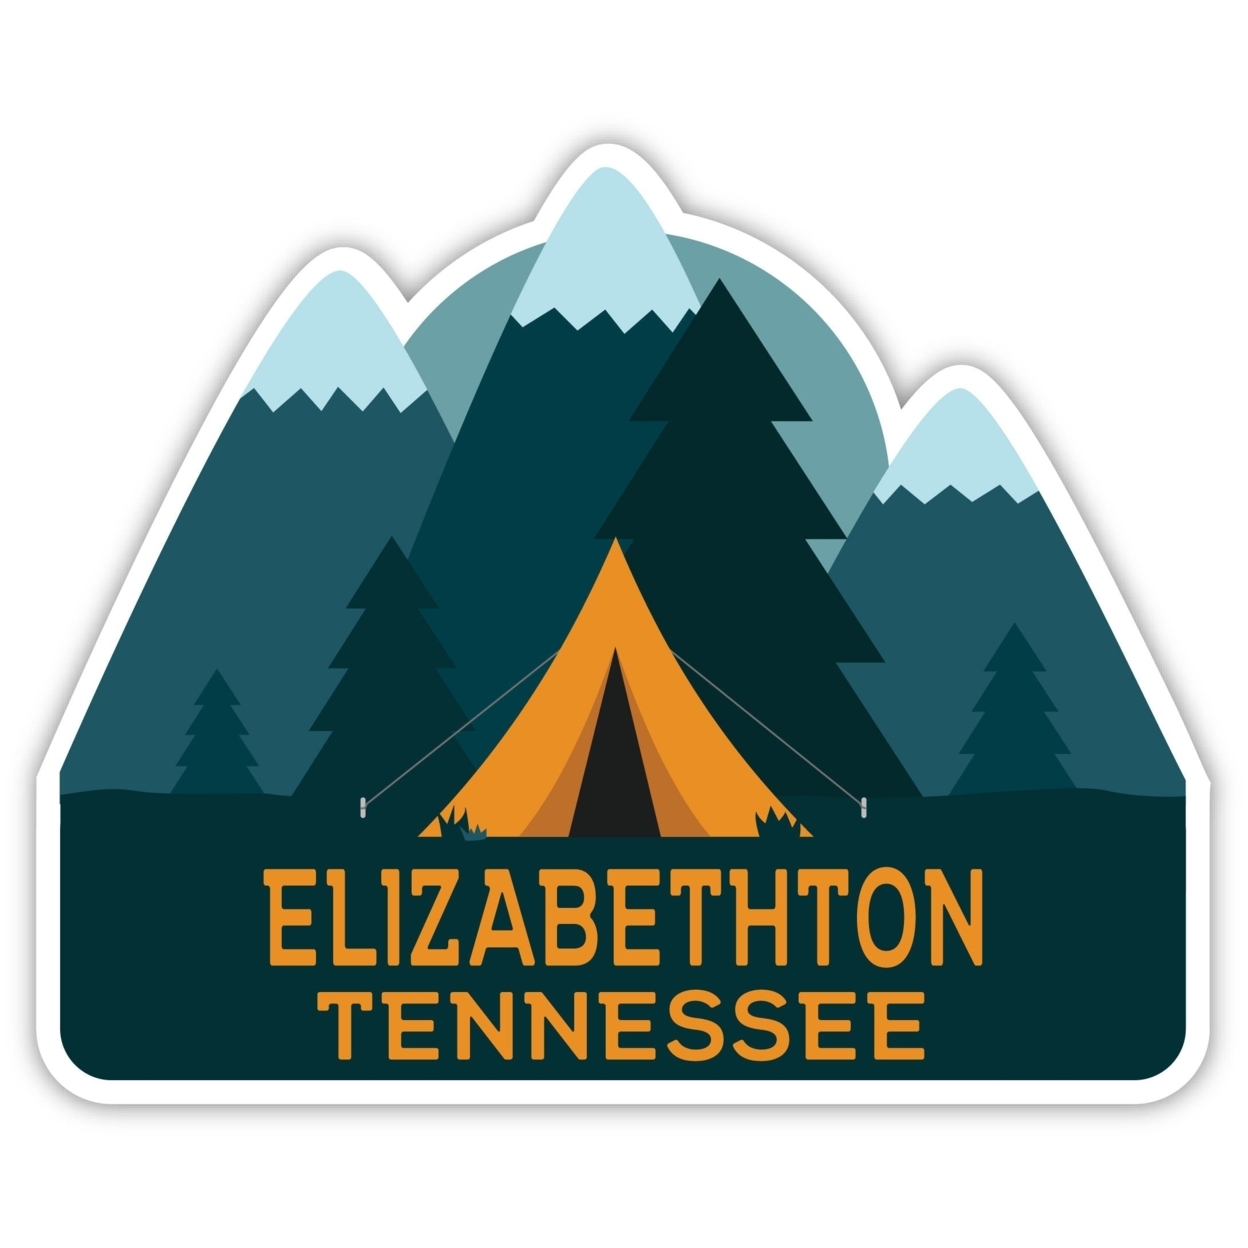 Elizabethton Tennessee Souvenir Decorative Stickers (Choose Theme And Size) - 4-Pack, 2-Inch, Bear